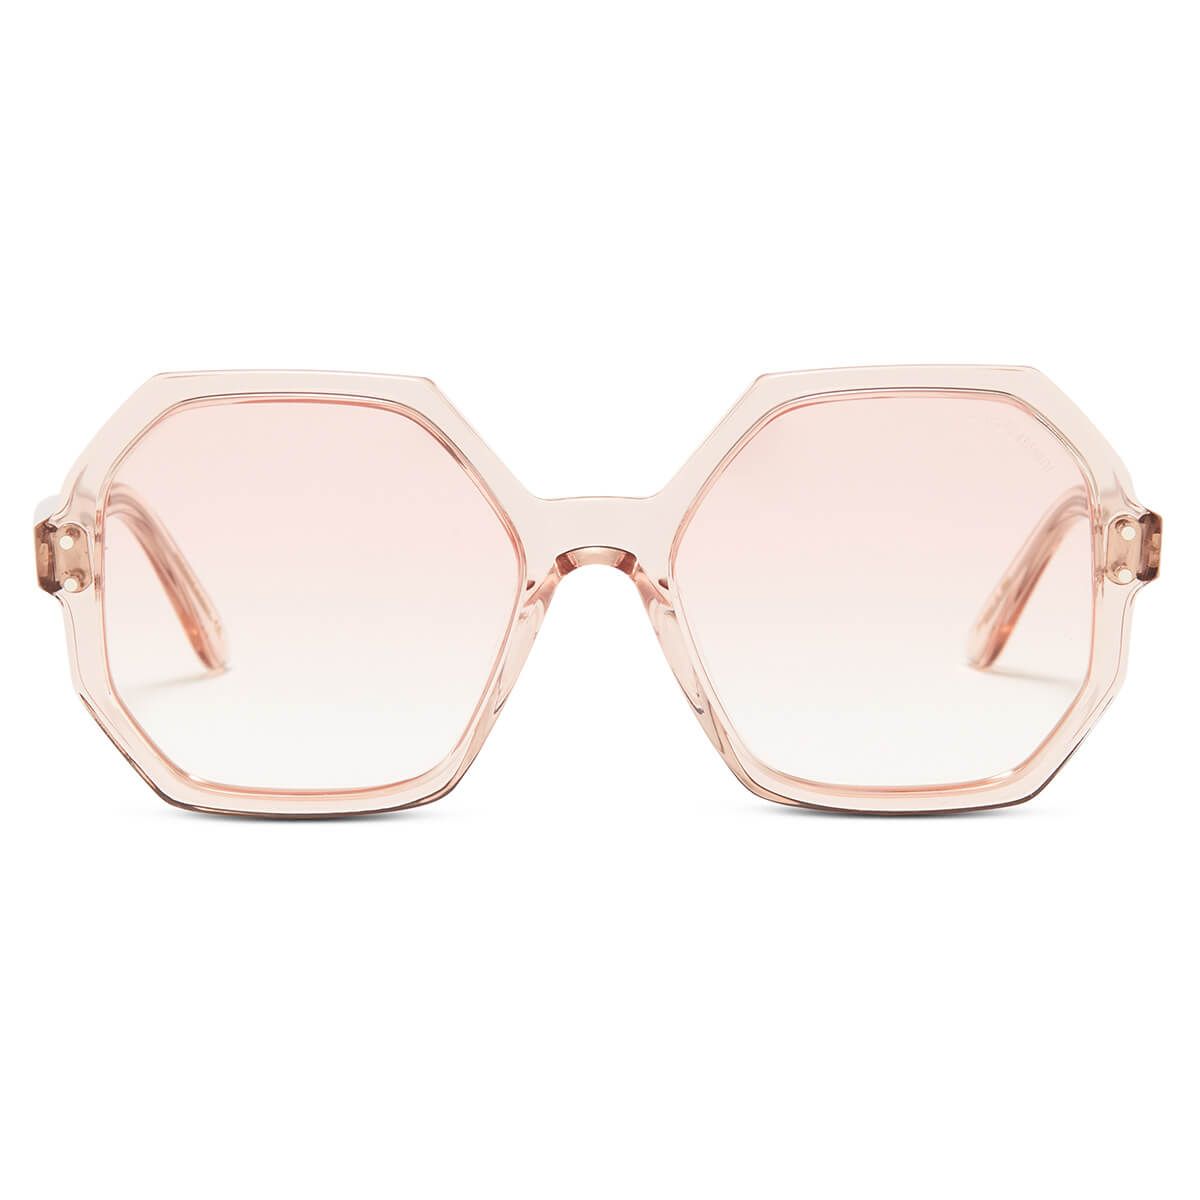 Yatton WS Sunglasses with Pink Coral acetate frame